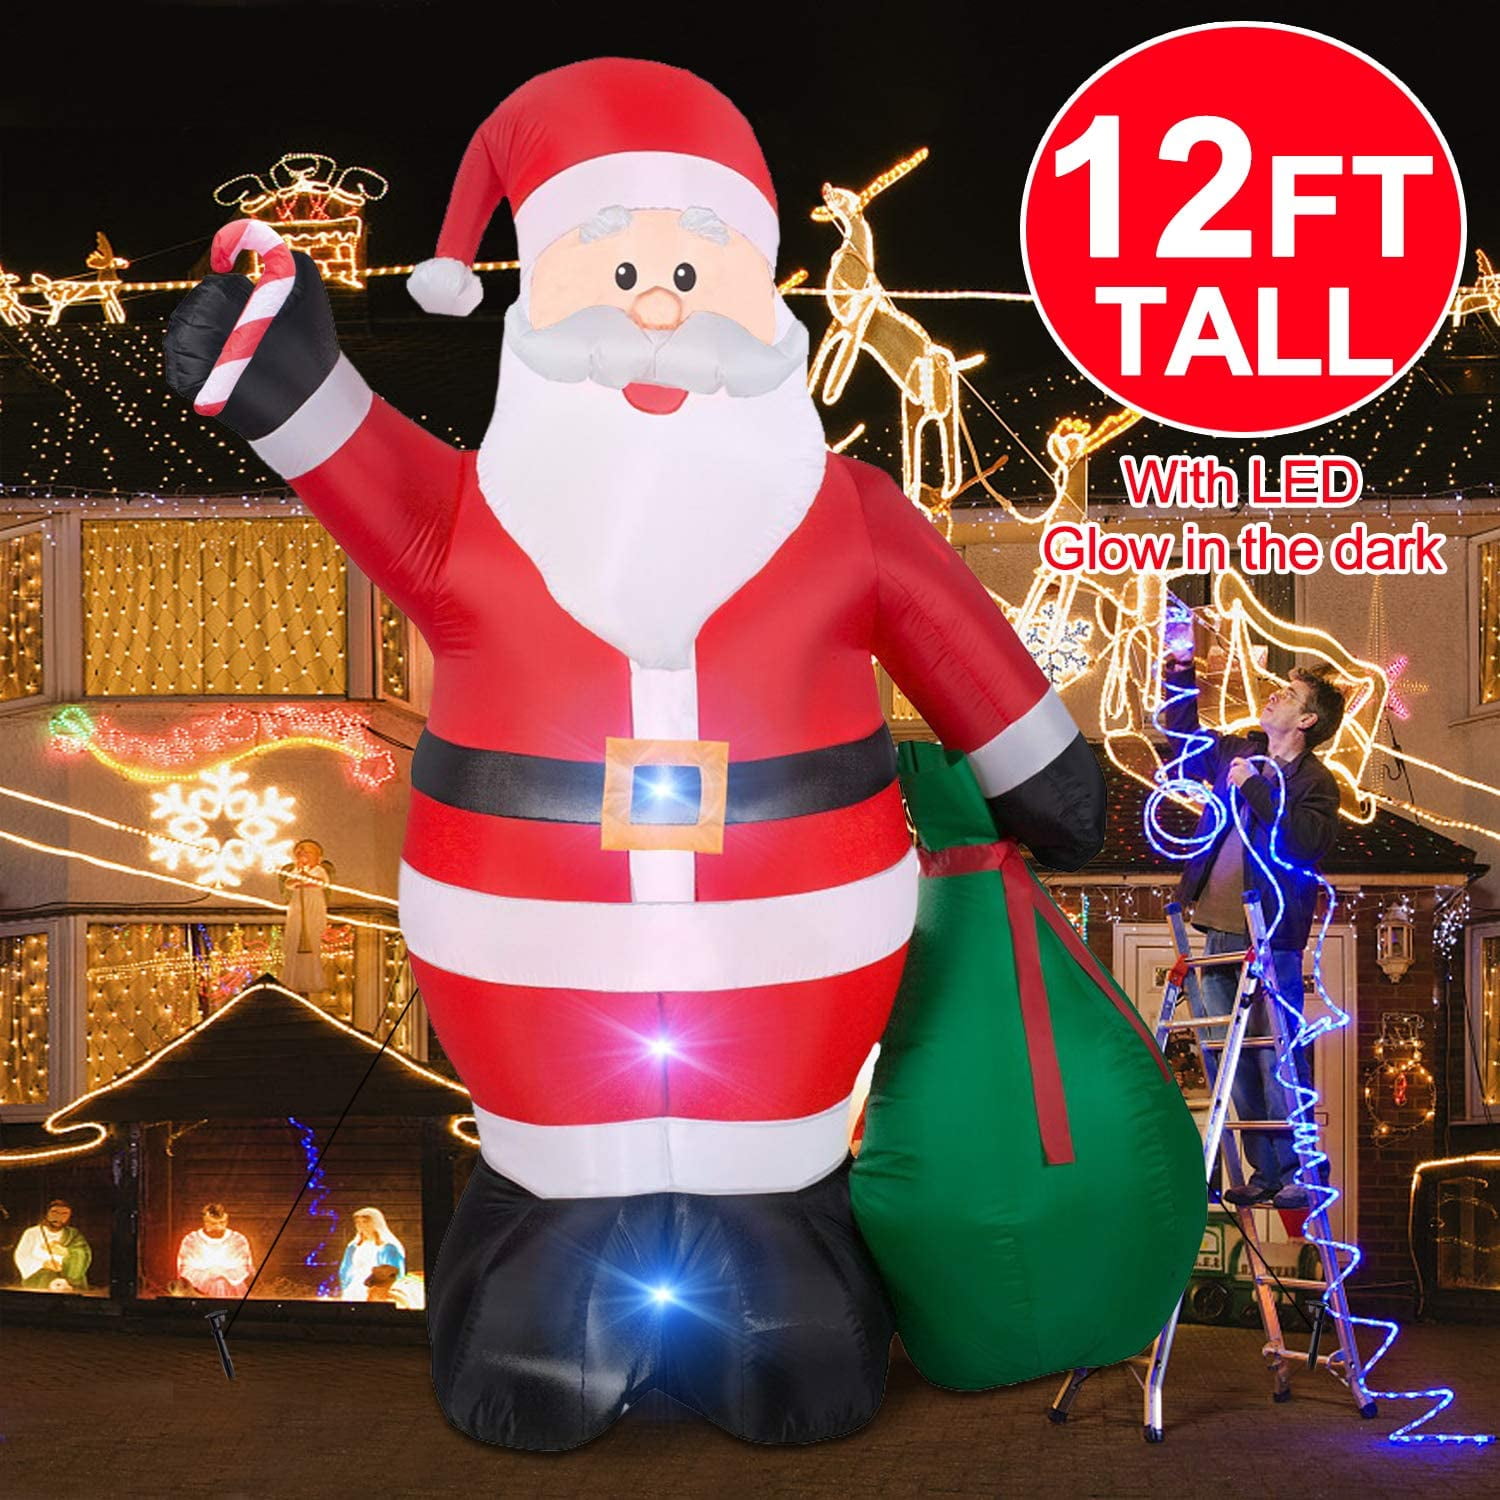 Christmas Inflatables Giant 12 Foot Inflatable Santa Claus with Gift Bag With LED Light for